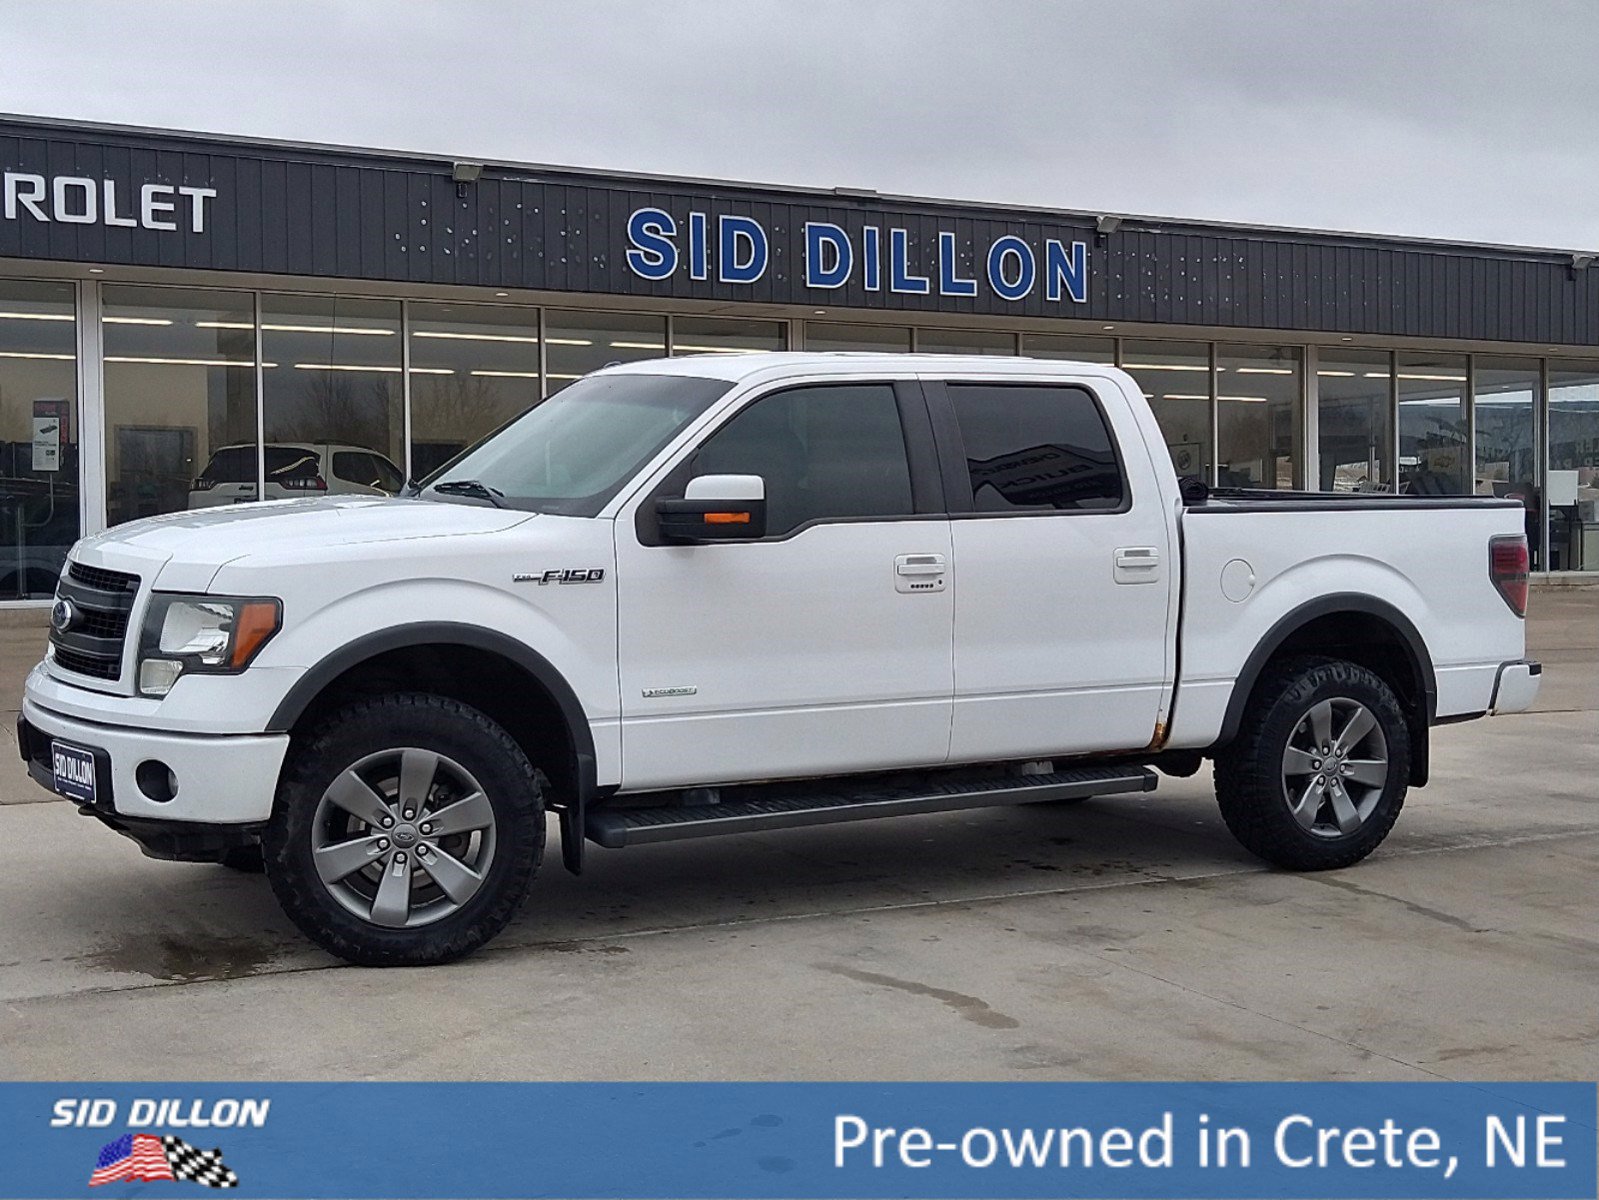 Pre-Owned 2014 Ford F-150 FX4 Crew Cab in #8F4822A | Sid Dillon